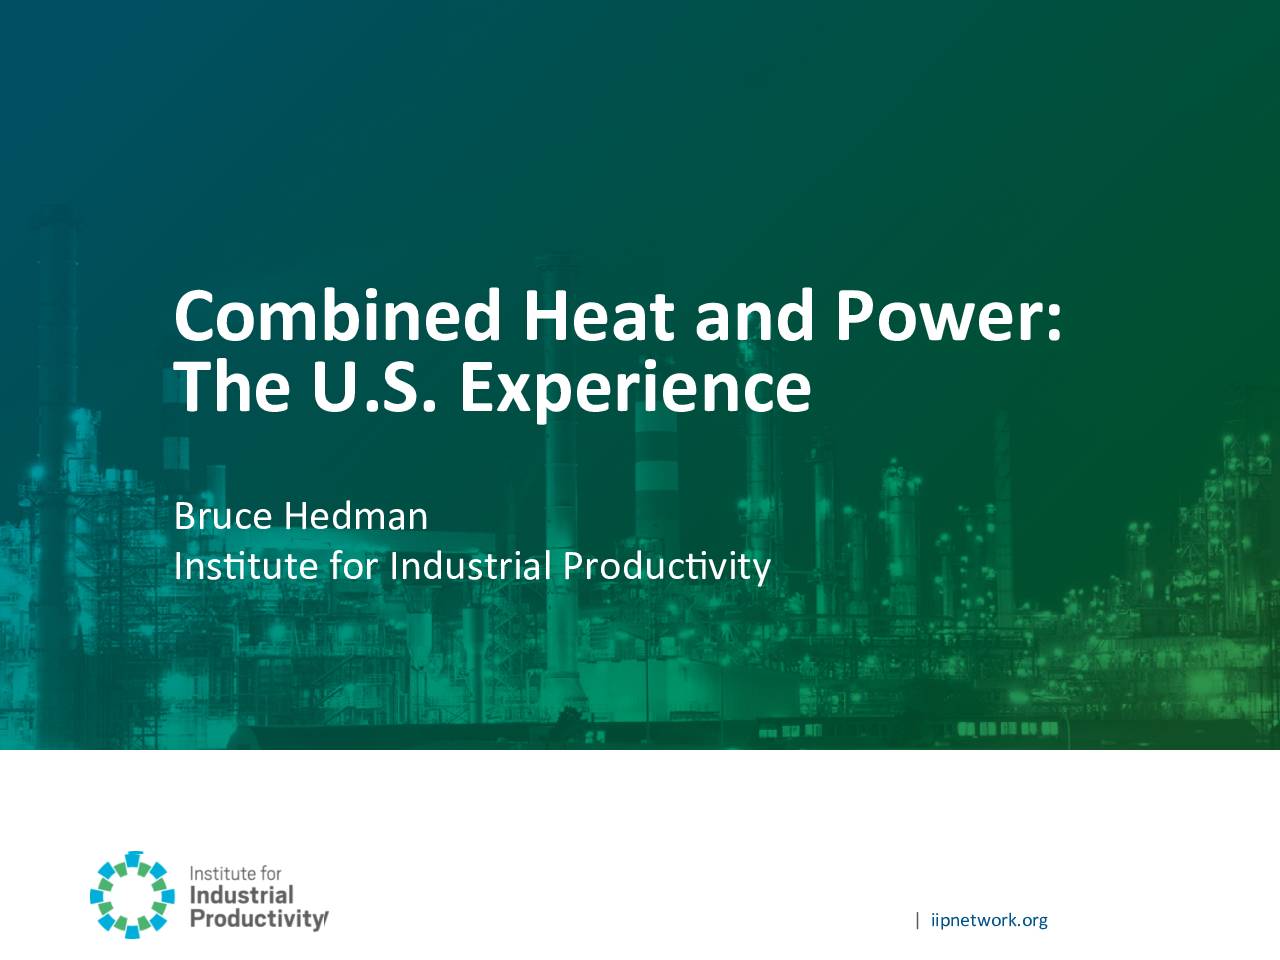 Combined Heat and Power: The U.S. Experience